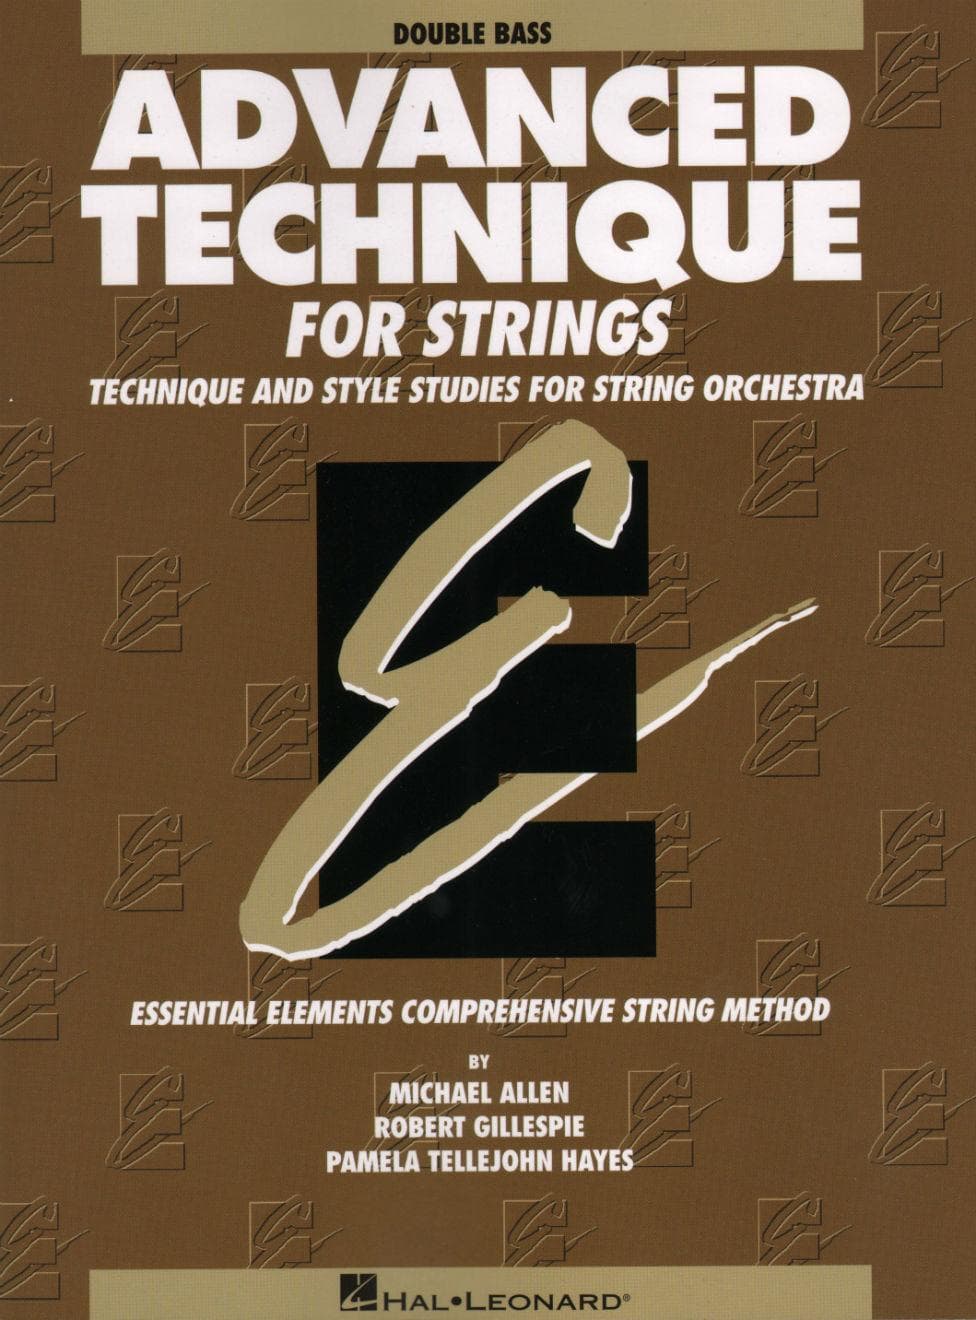 Advanced Technique for Strings - Bass - by Allen/Gillespie/Hayes - Hal Leonard Publication